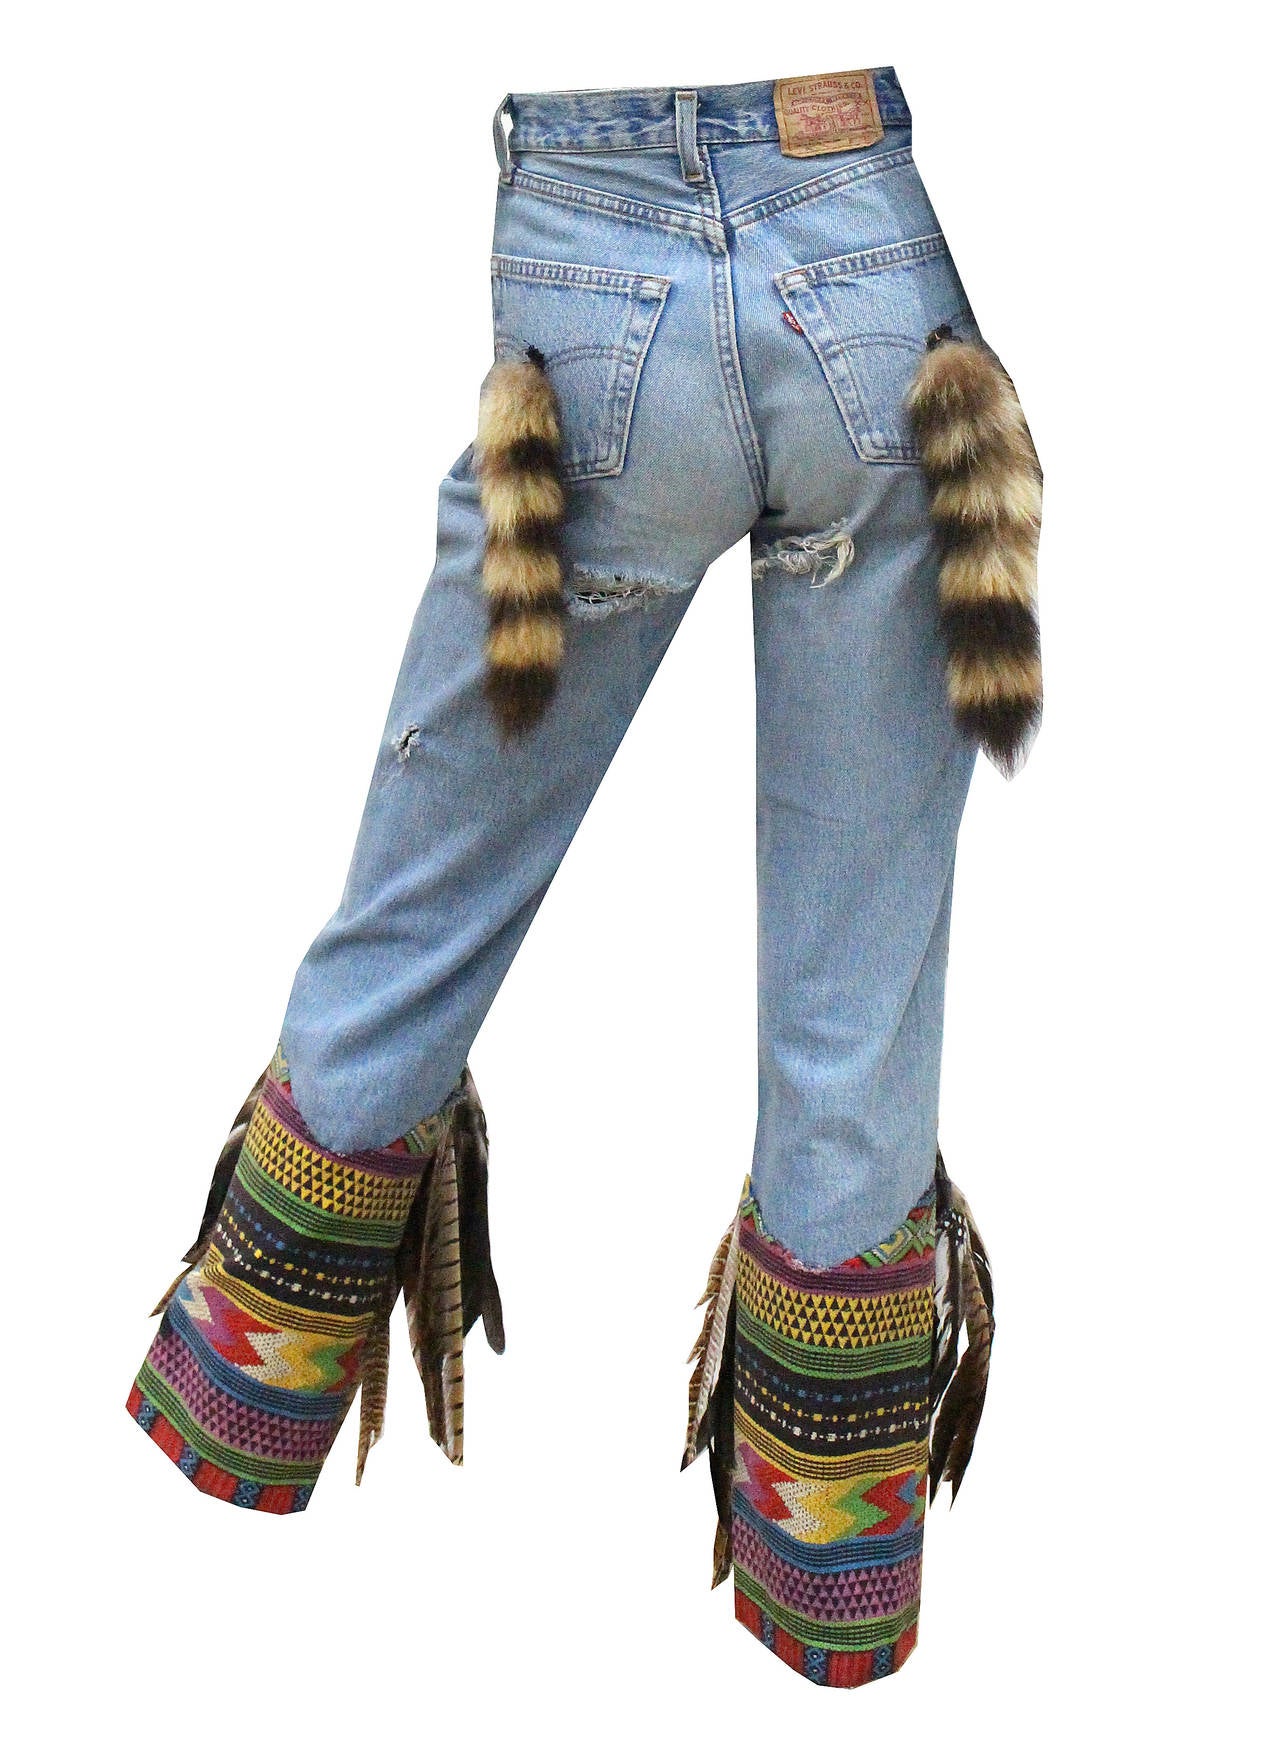 Iconic Tom Ford for Gucci Spring Summer 1999 feather denim jeans